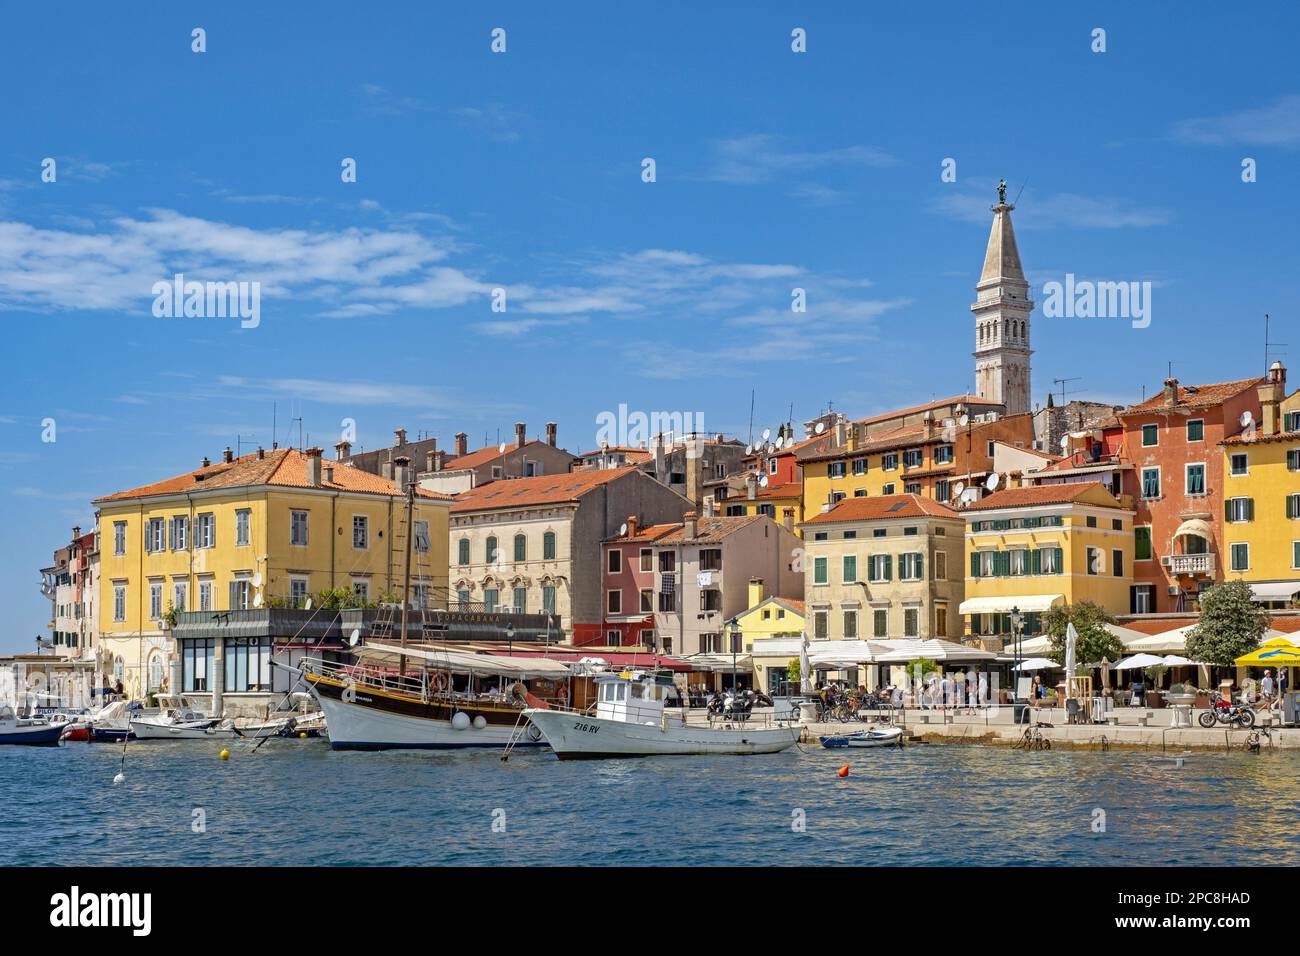 Waterfront showing boats and sailing ship in harbour of the city Rovinj / Rovigno, seaside resort along the north Adriatic Sea, Istria County, Croatia Stock Photo